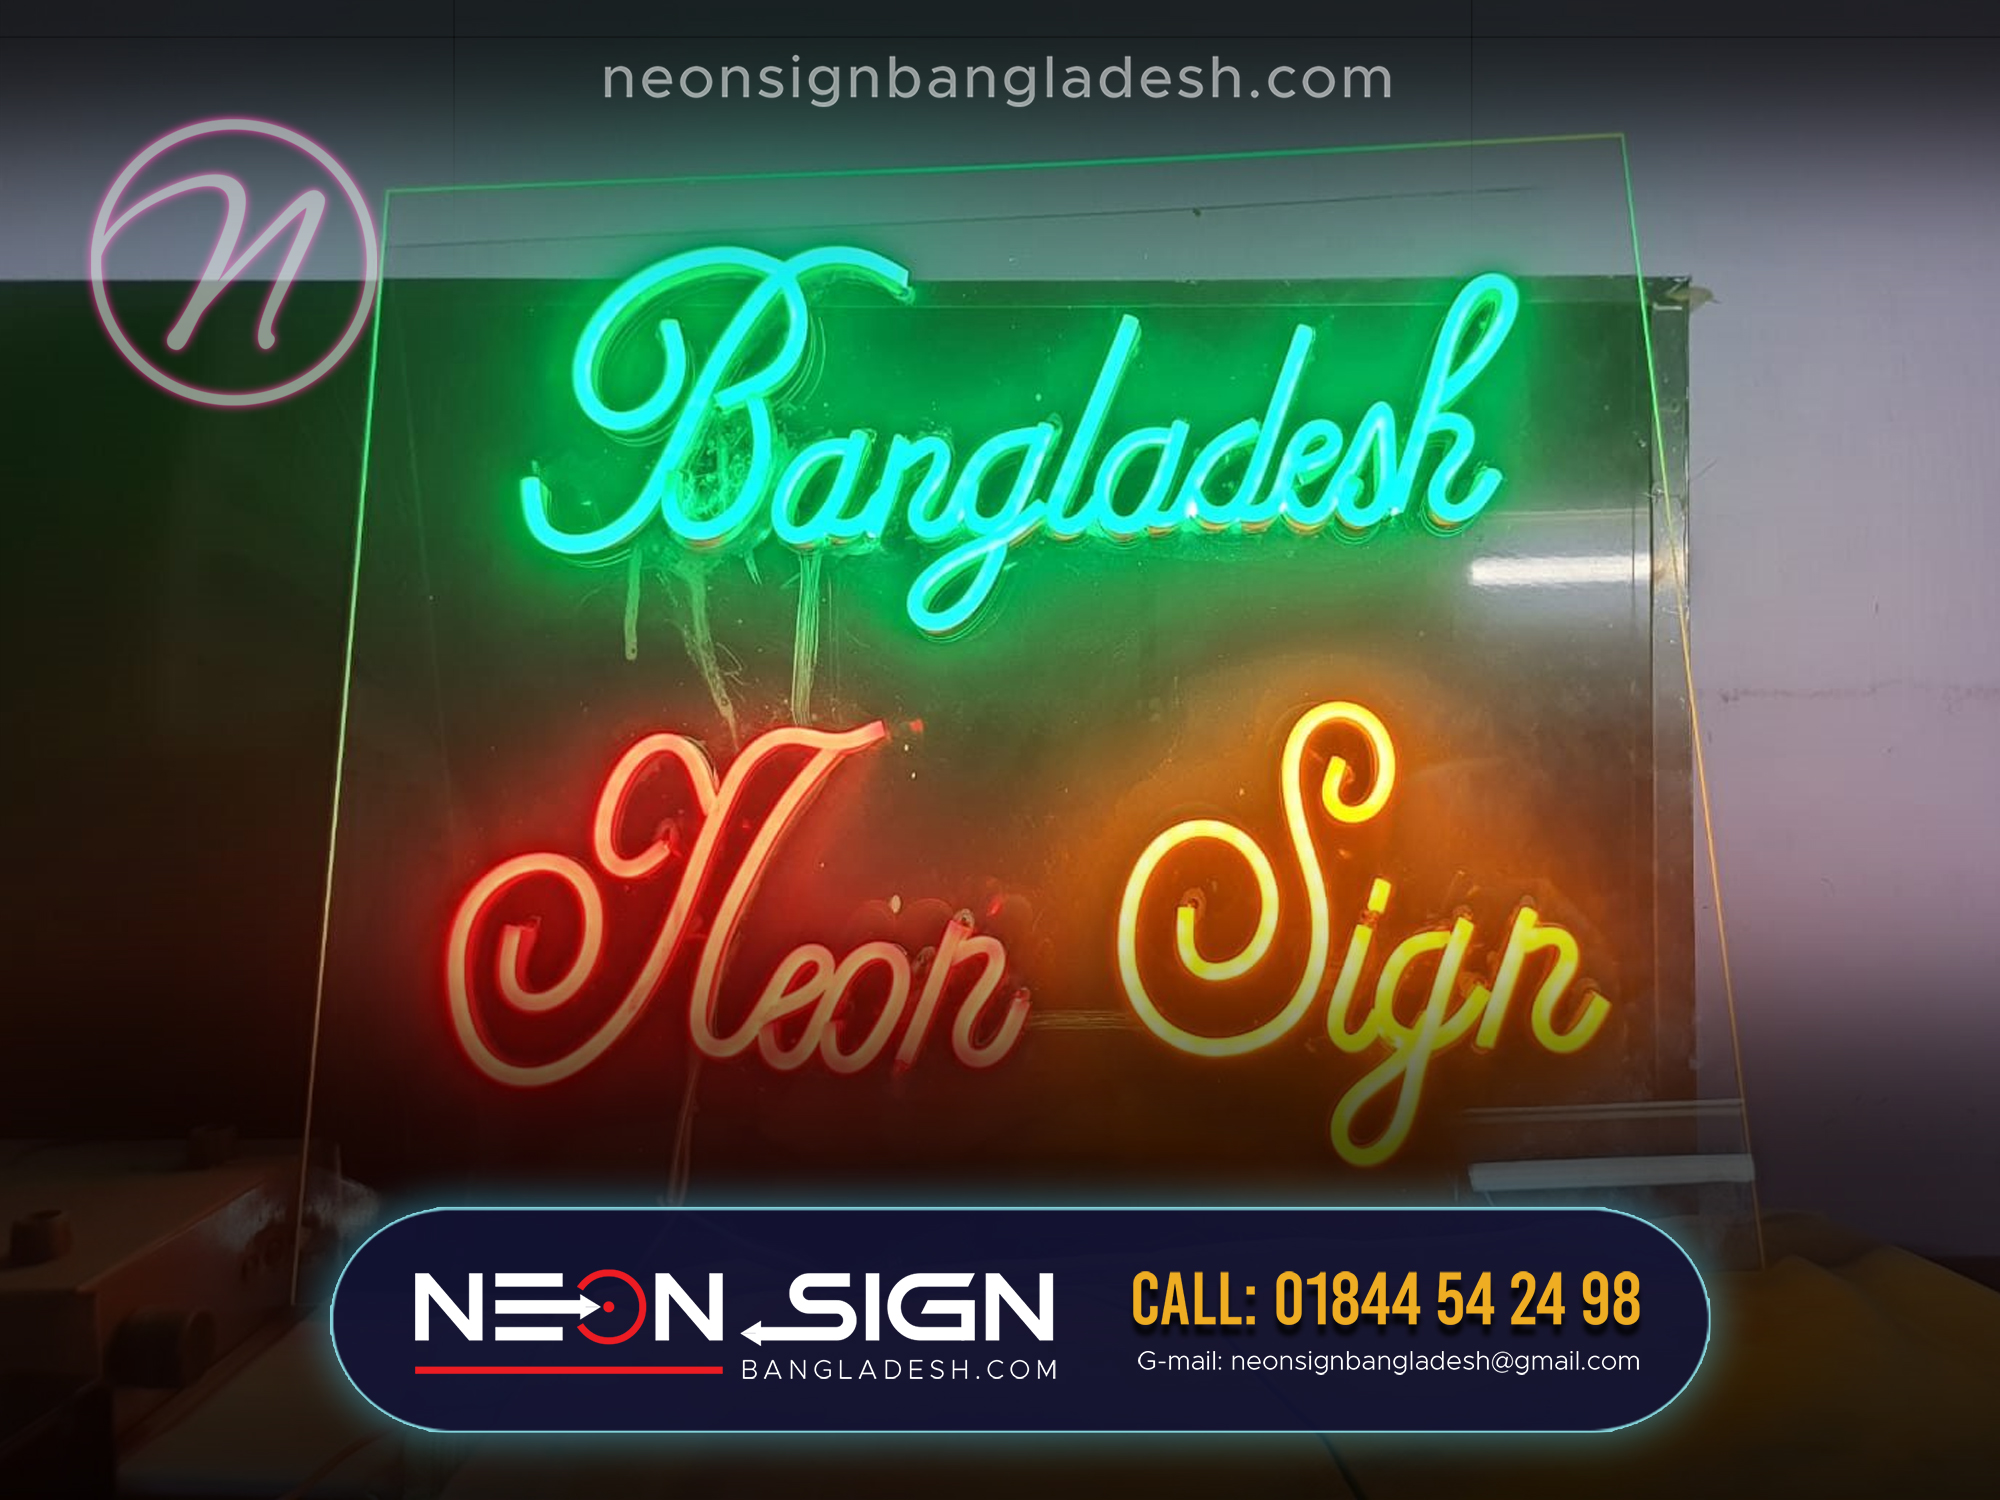 Neon directional signs bd price. neon sign board price in bangladesh. bangladesh neon sign. custom neon signs bd. led sign bd. neon flexible strip light price in bangladesh. led sign board price in bangladesh. signage bd.